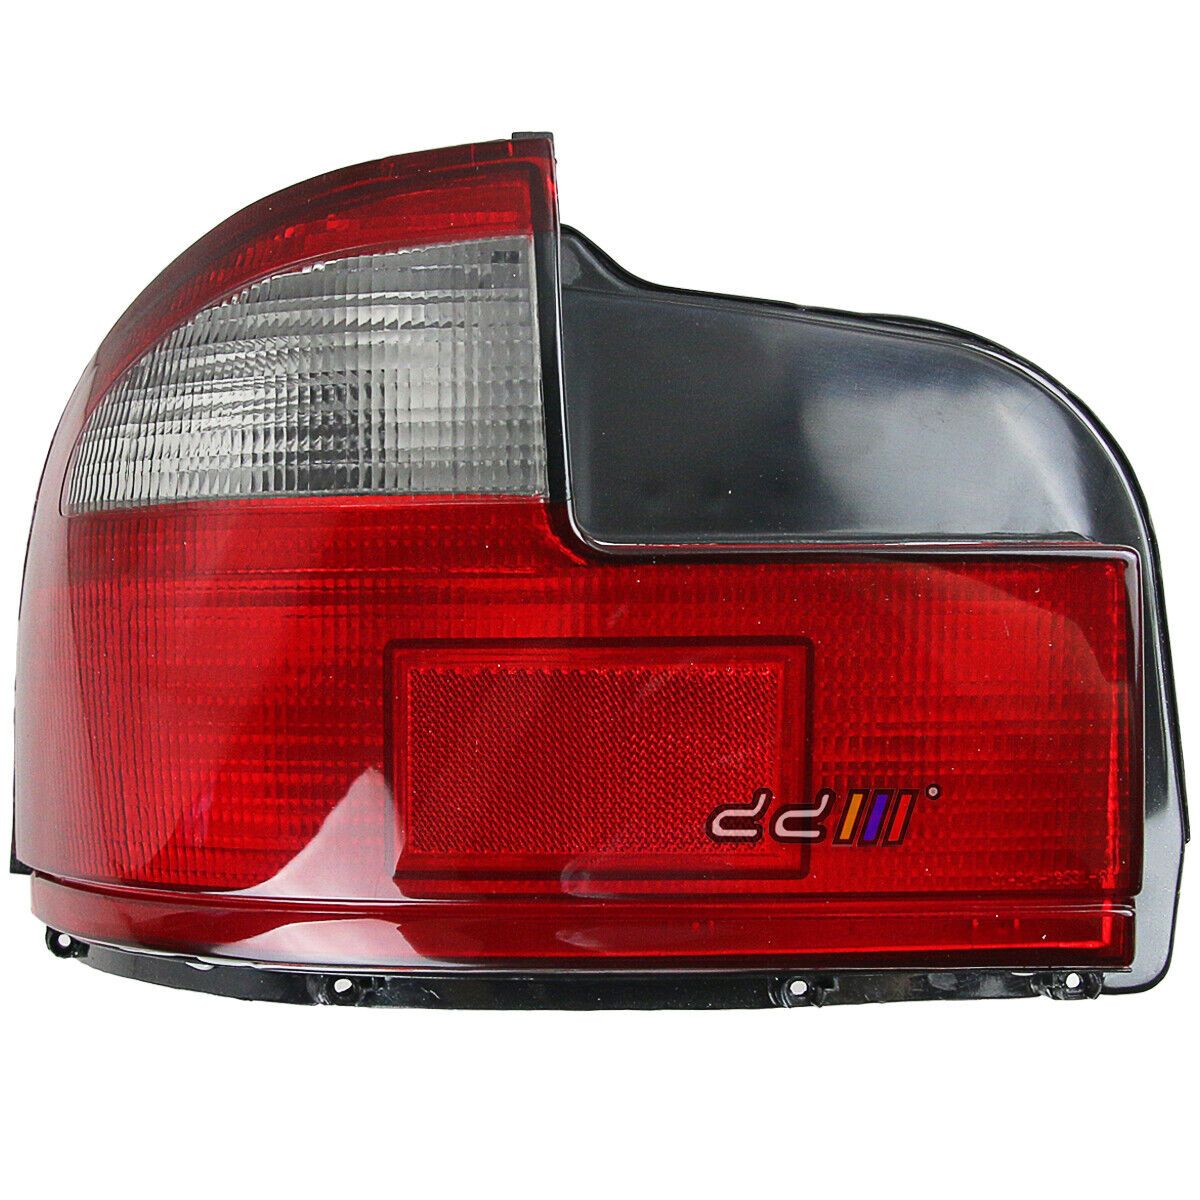 LUCID Left Side Tail Light Lamp For Proton Persona Wira C96 C97 C98 1993-2004